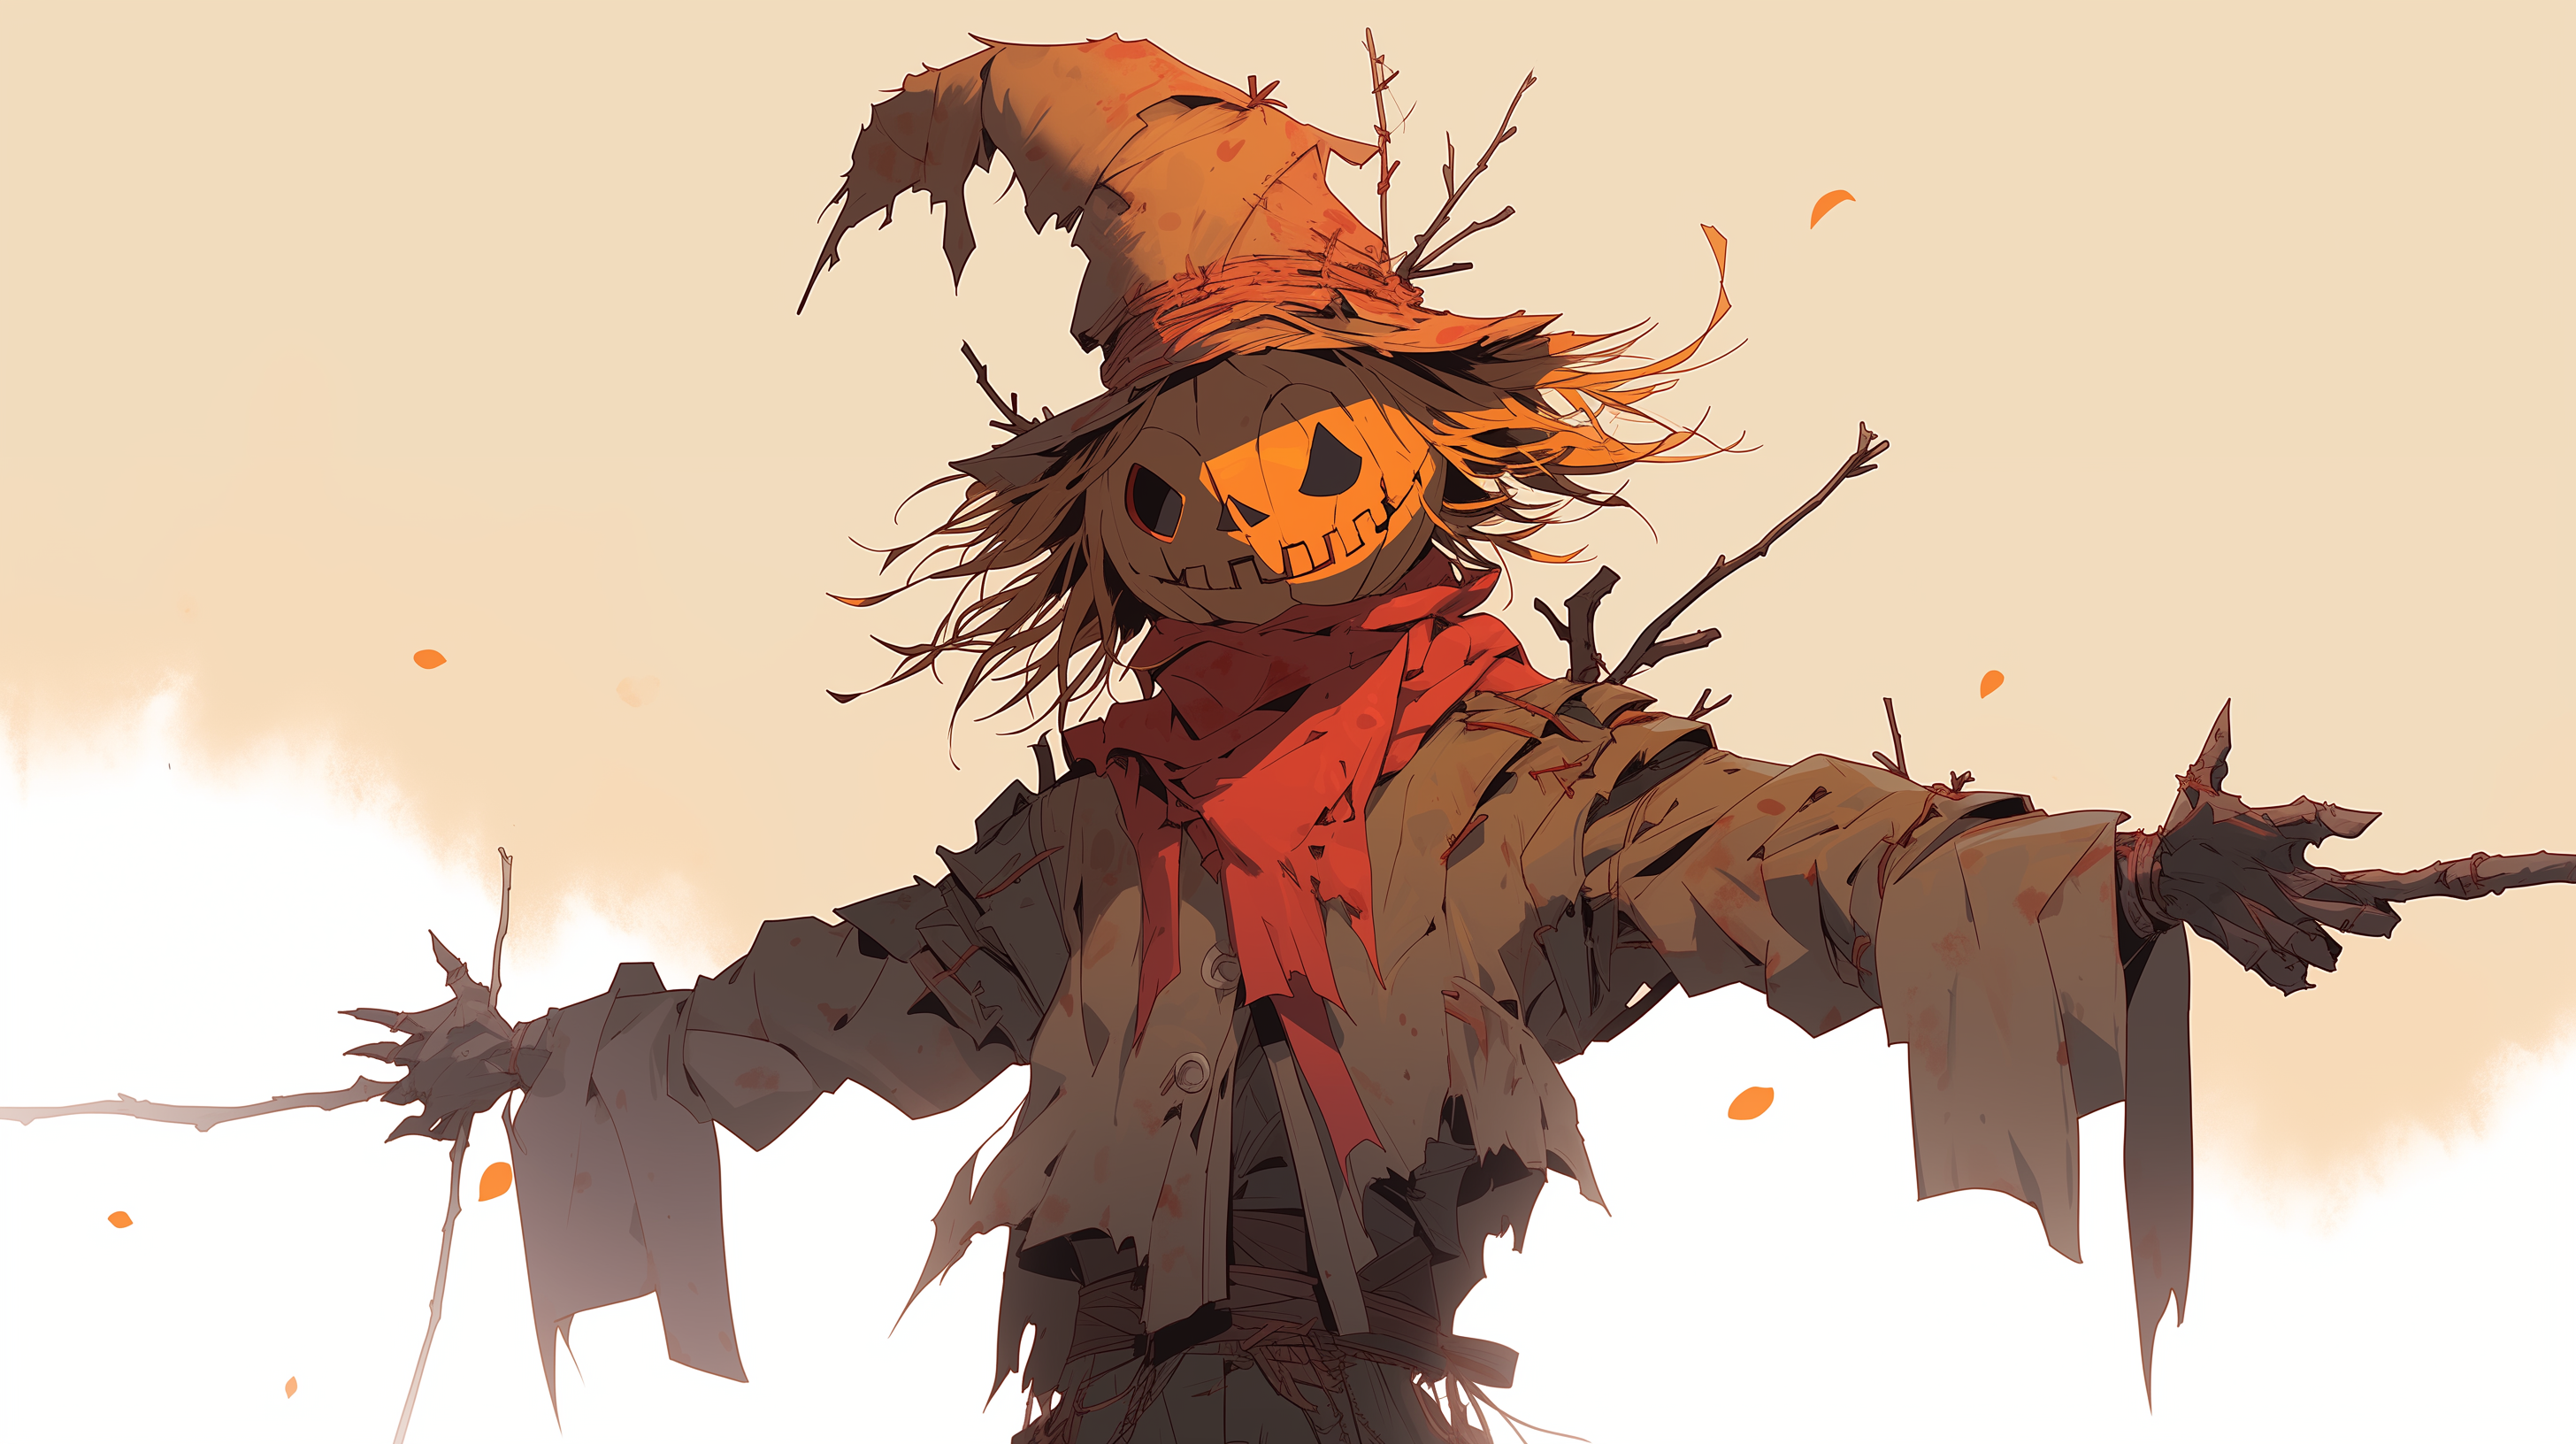 HD Halloween desktop wallpaper featuring a spooky scarecrow with a jack-o'-lantern head against a soft, autumnal backdrop.